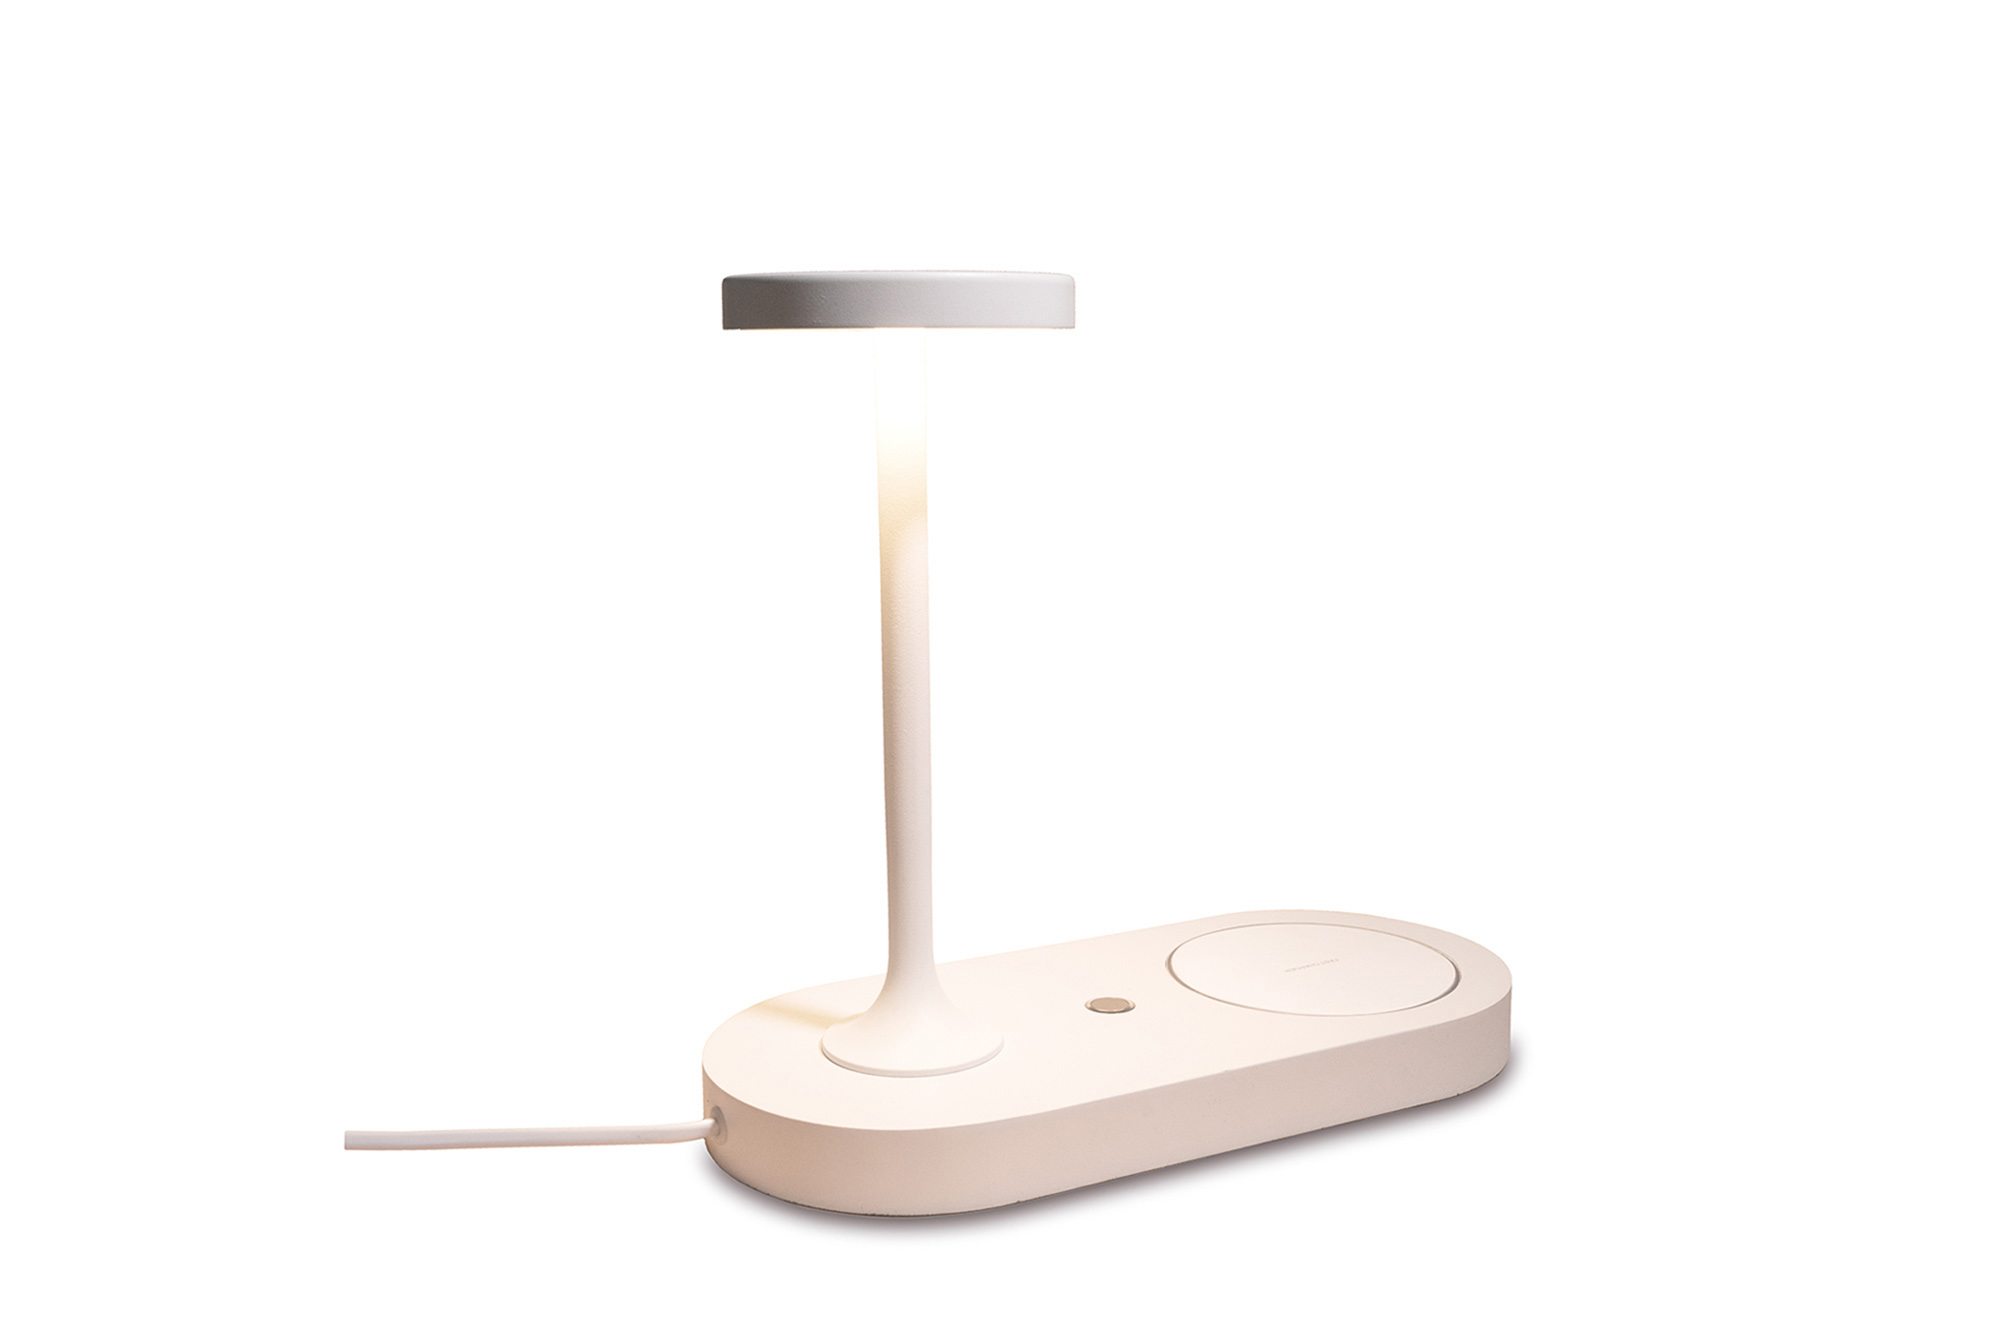 M7290  Ceres Table Lamp 6W LED With Mobile Phone Induction Charger & USB Charger White